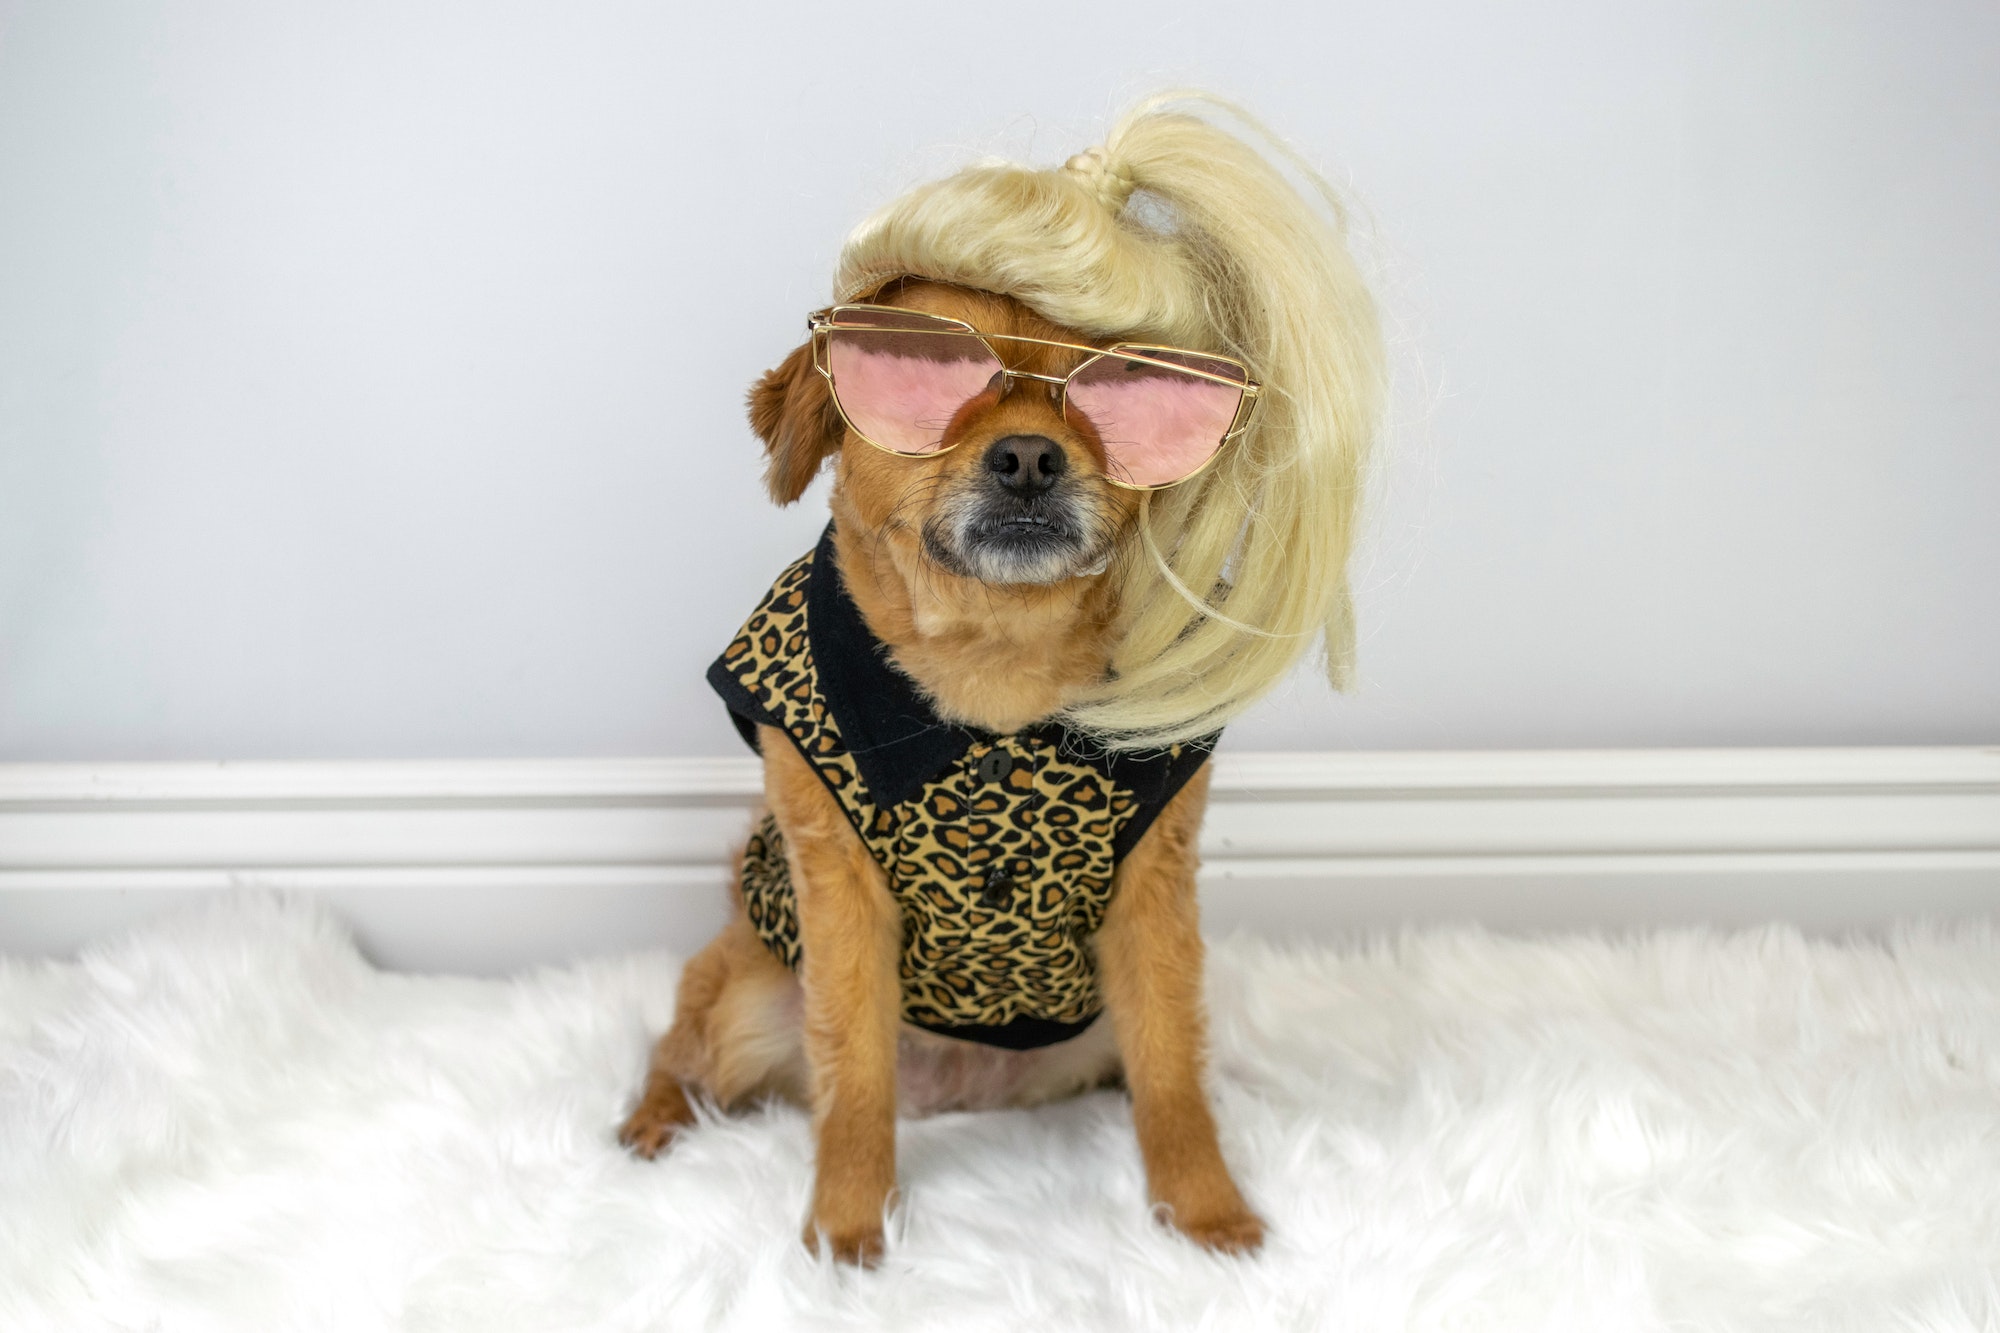 Funny posh dog wearing blonde wig and sunglasses